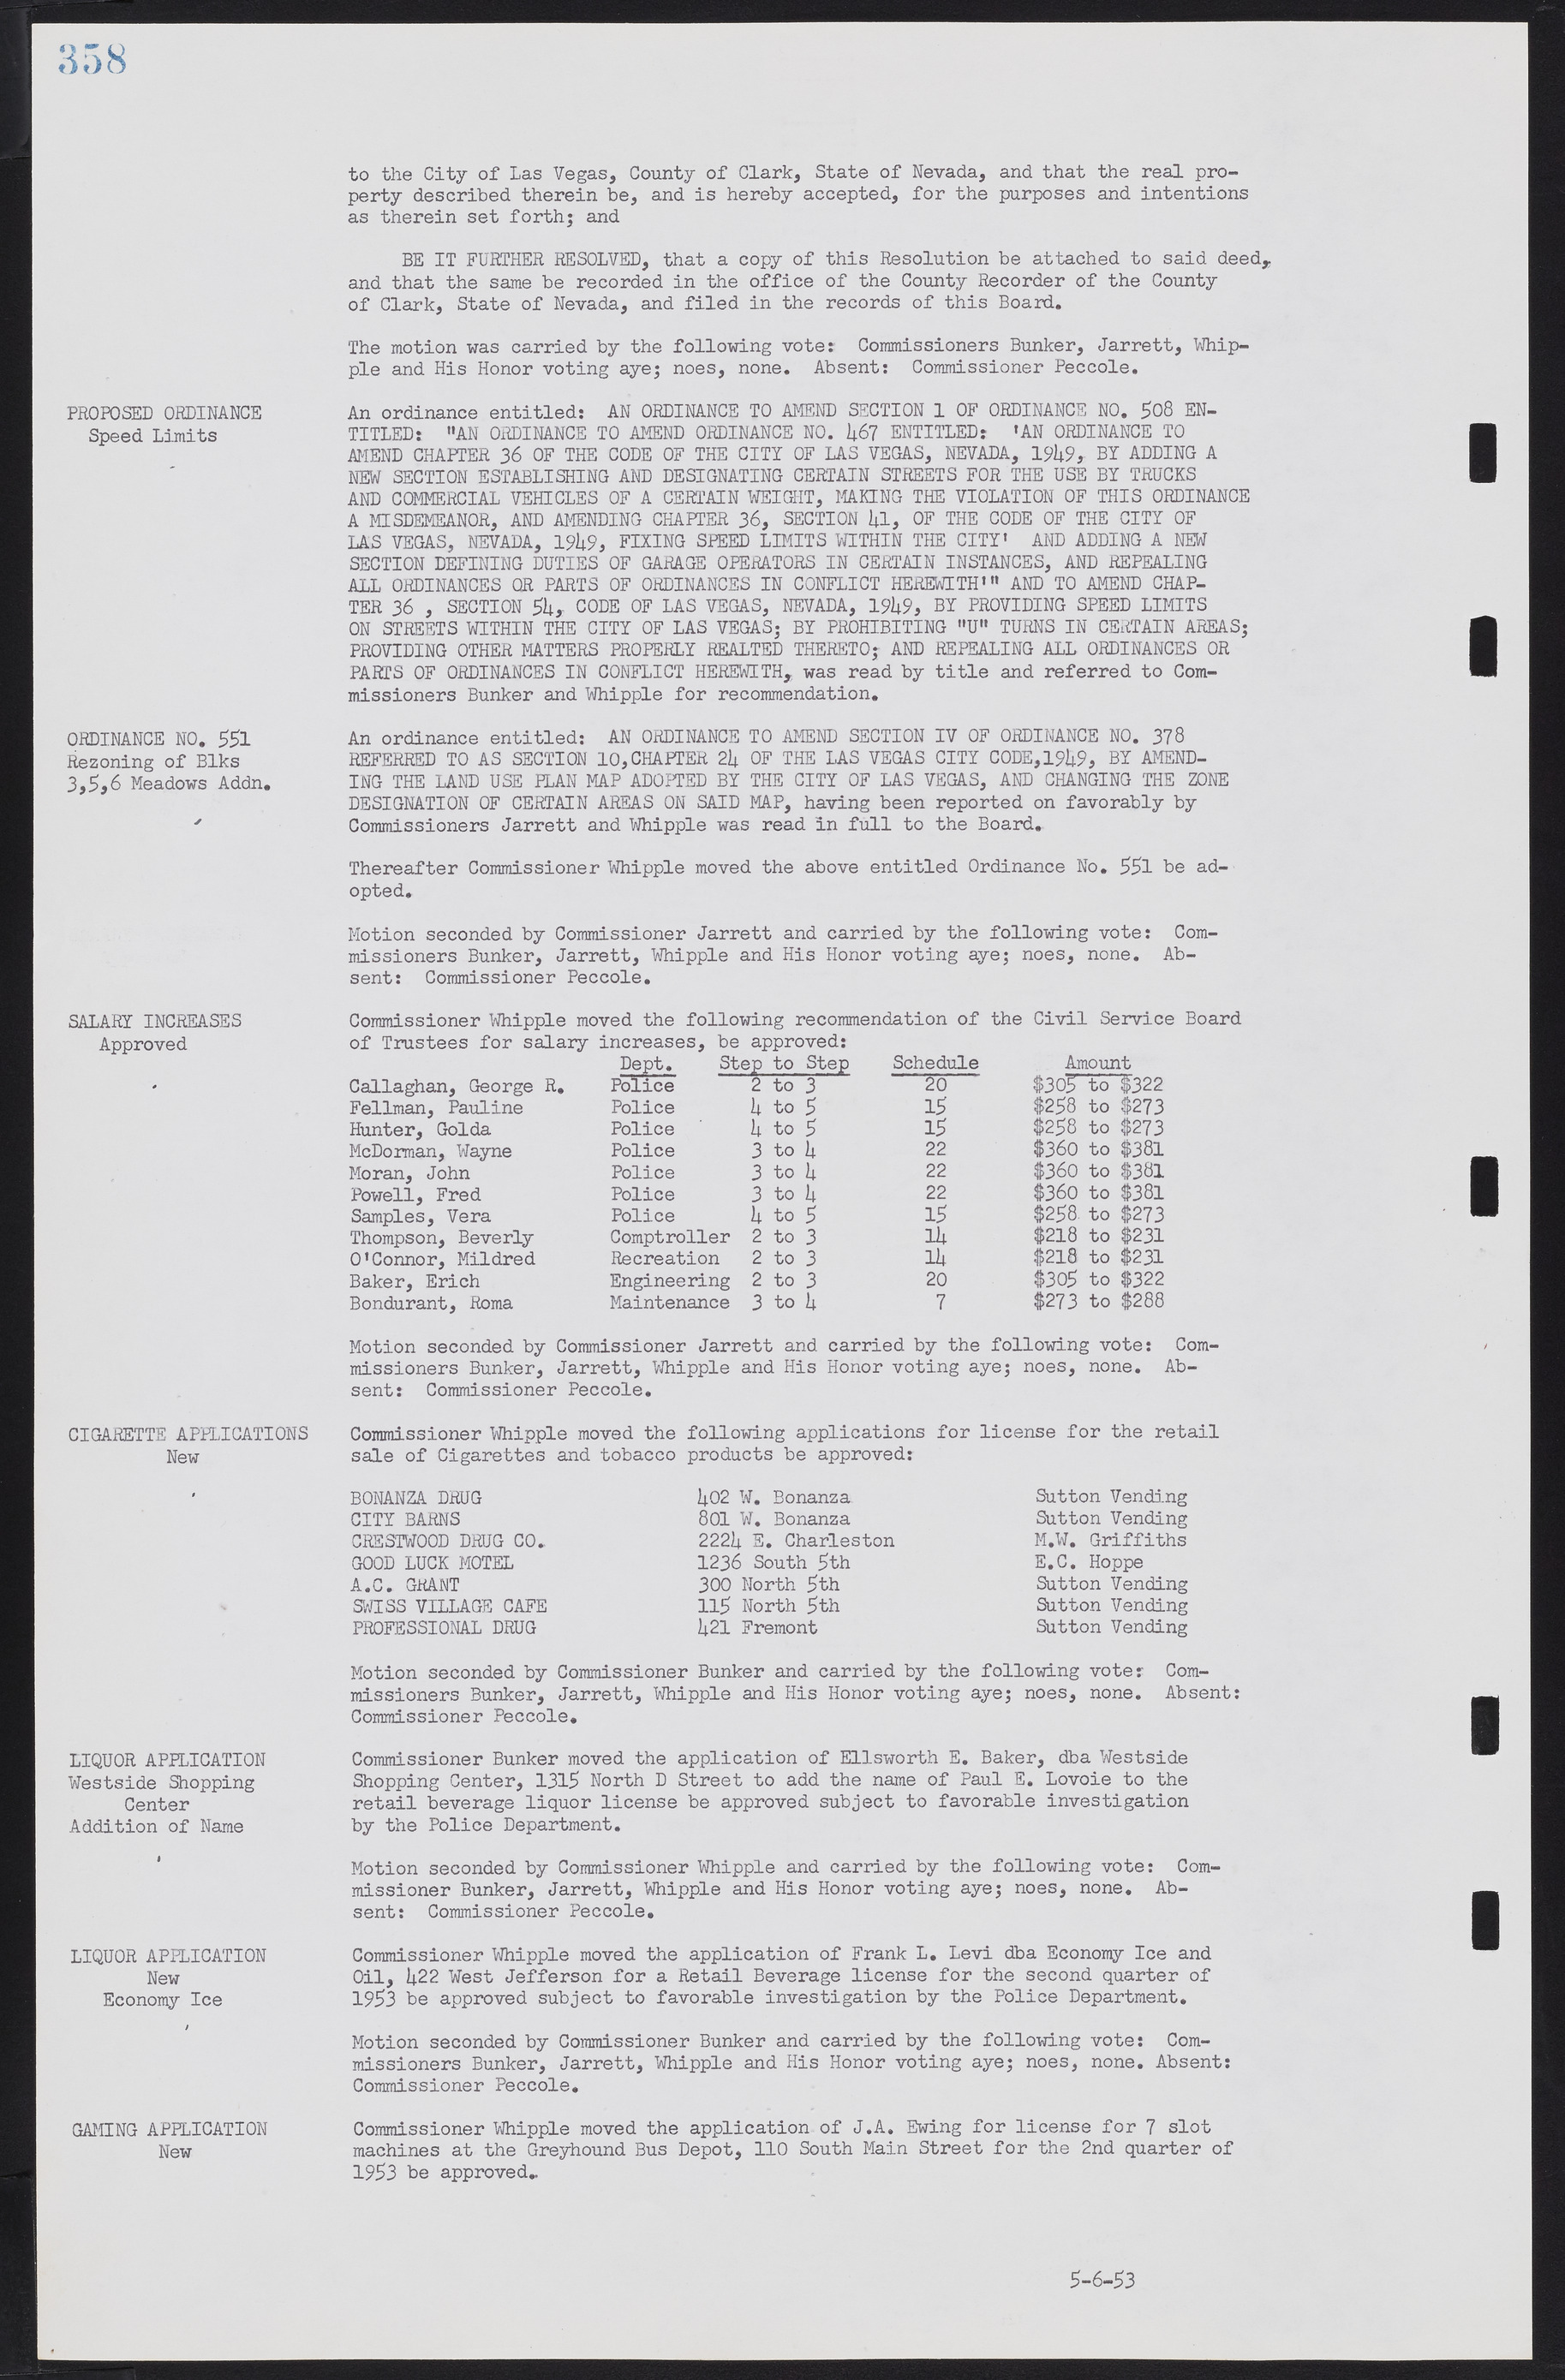 Las Vegas City Commission Minutes, May 26, 1952 to February 17, 1954, lvc000008-386